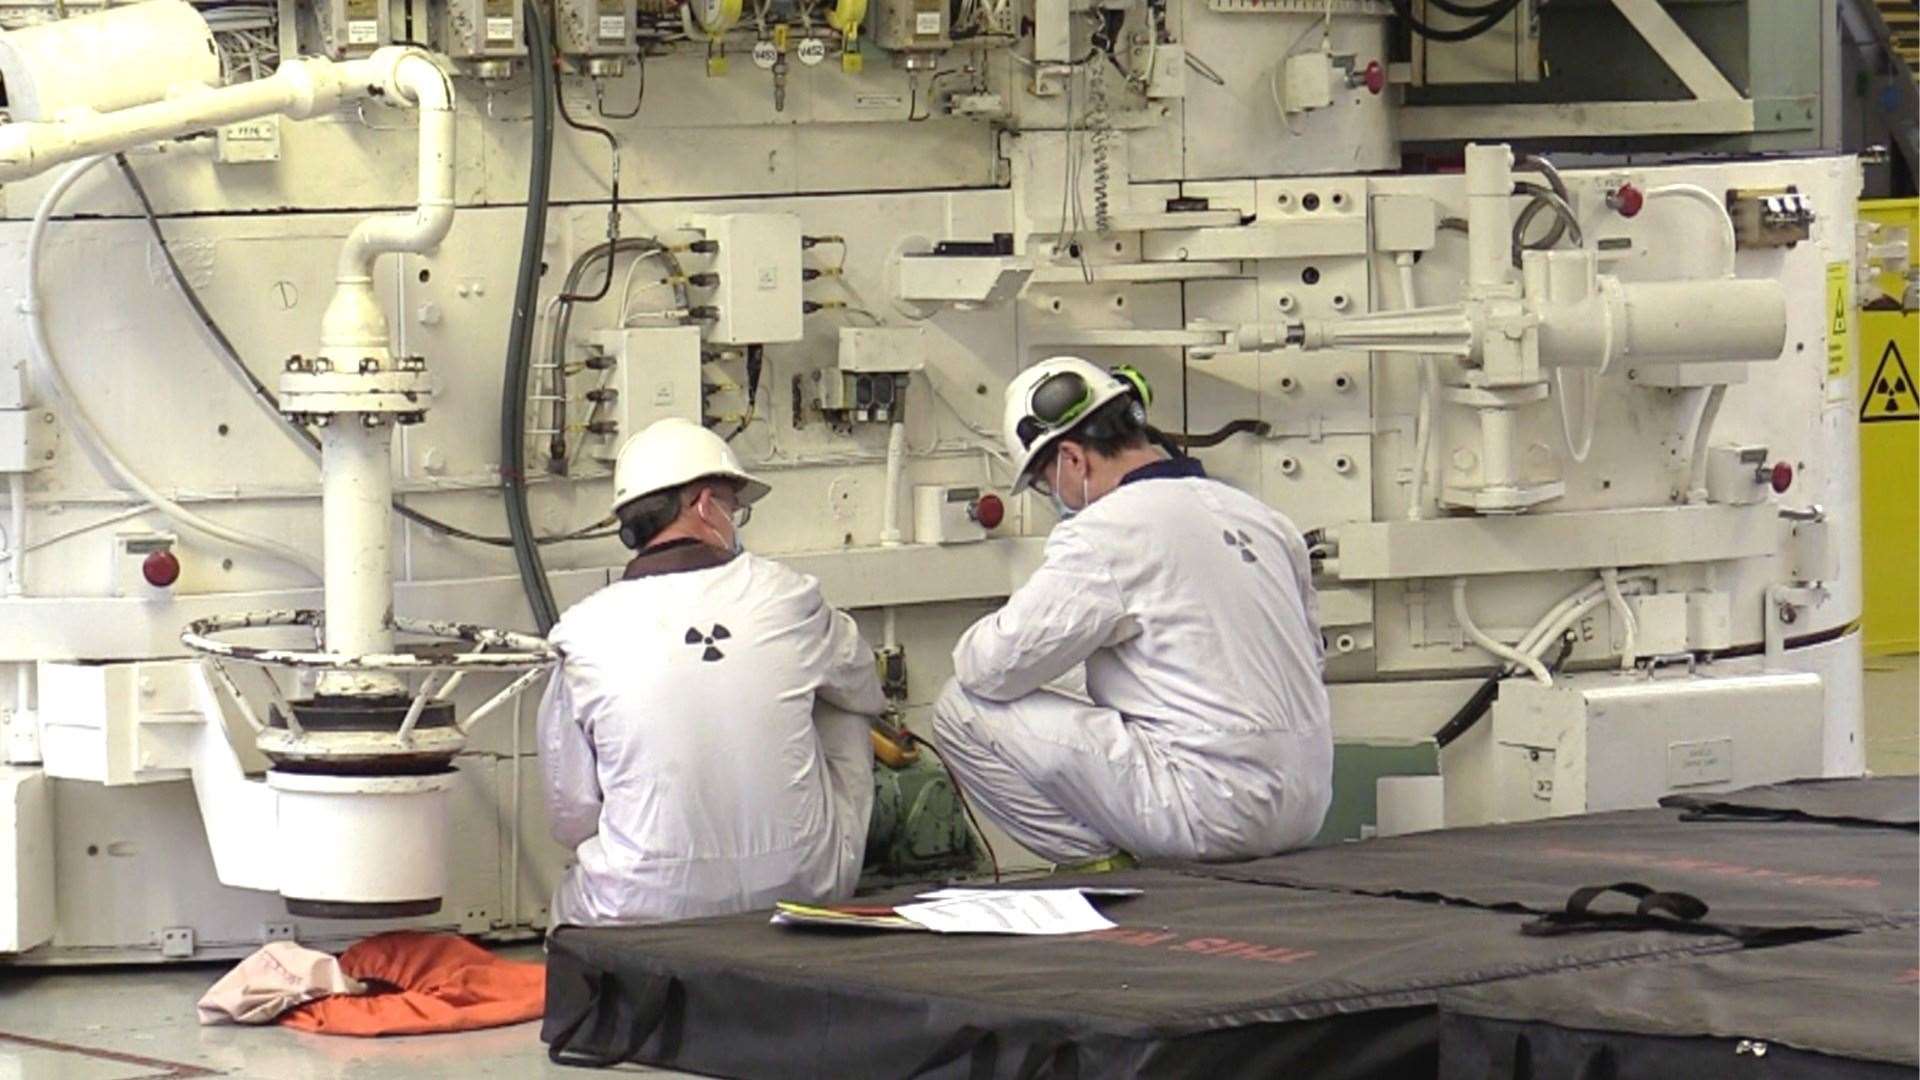 Dungeness employees at work in the reactor room